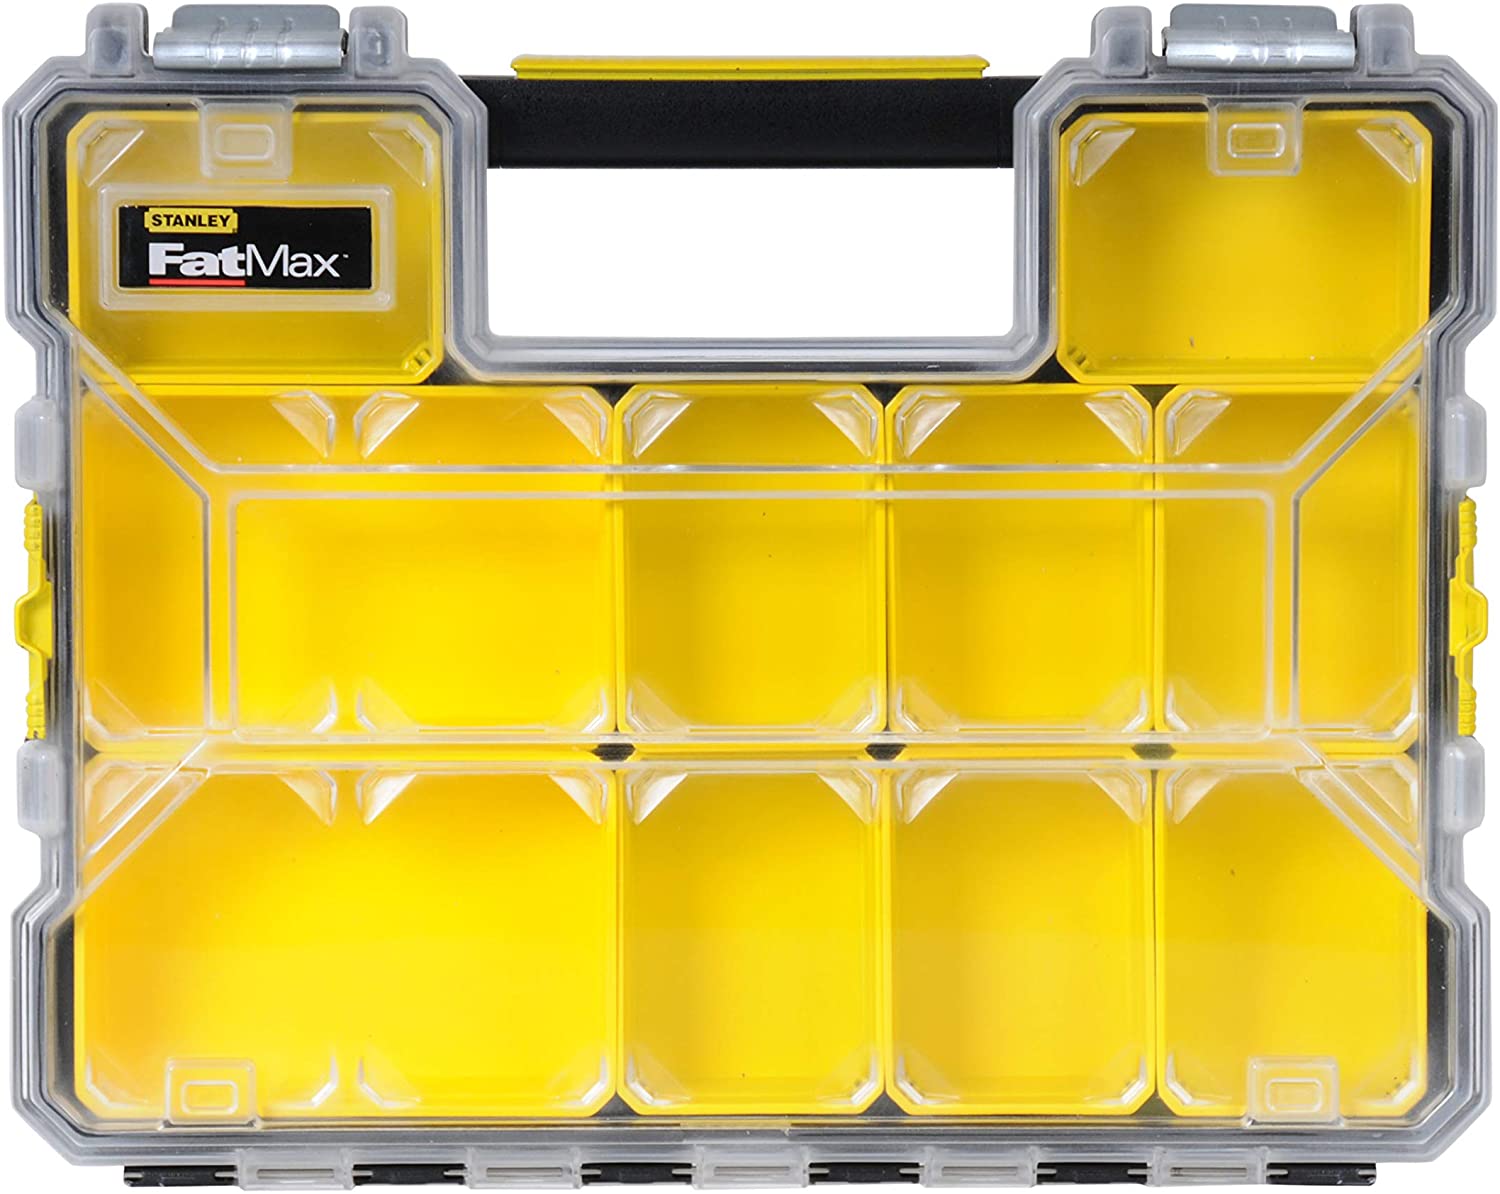 FATMAX Pro Shallow Stackable Storage Organiser for Small Parts, Removable Compartments - 1